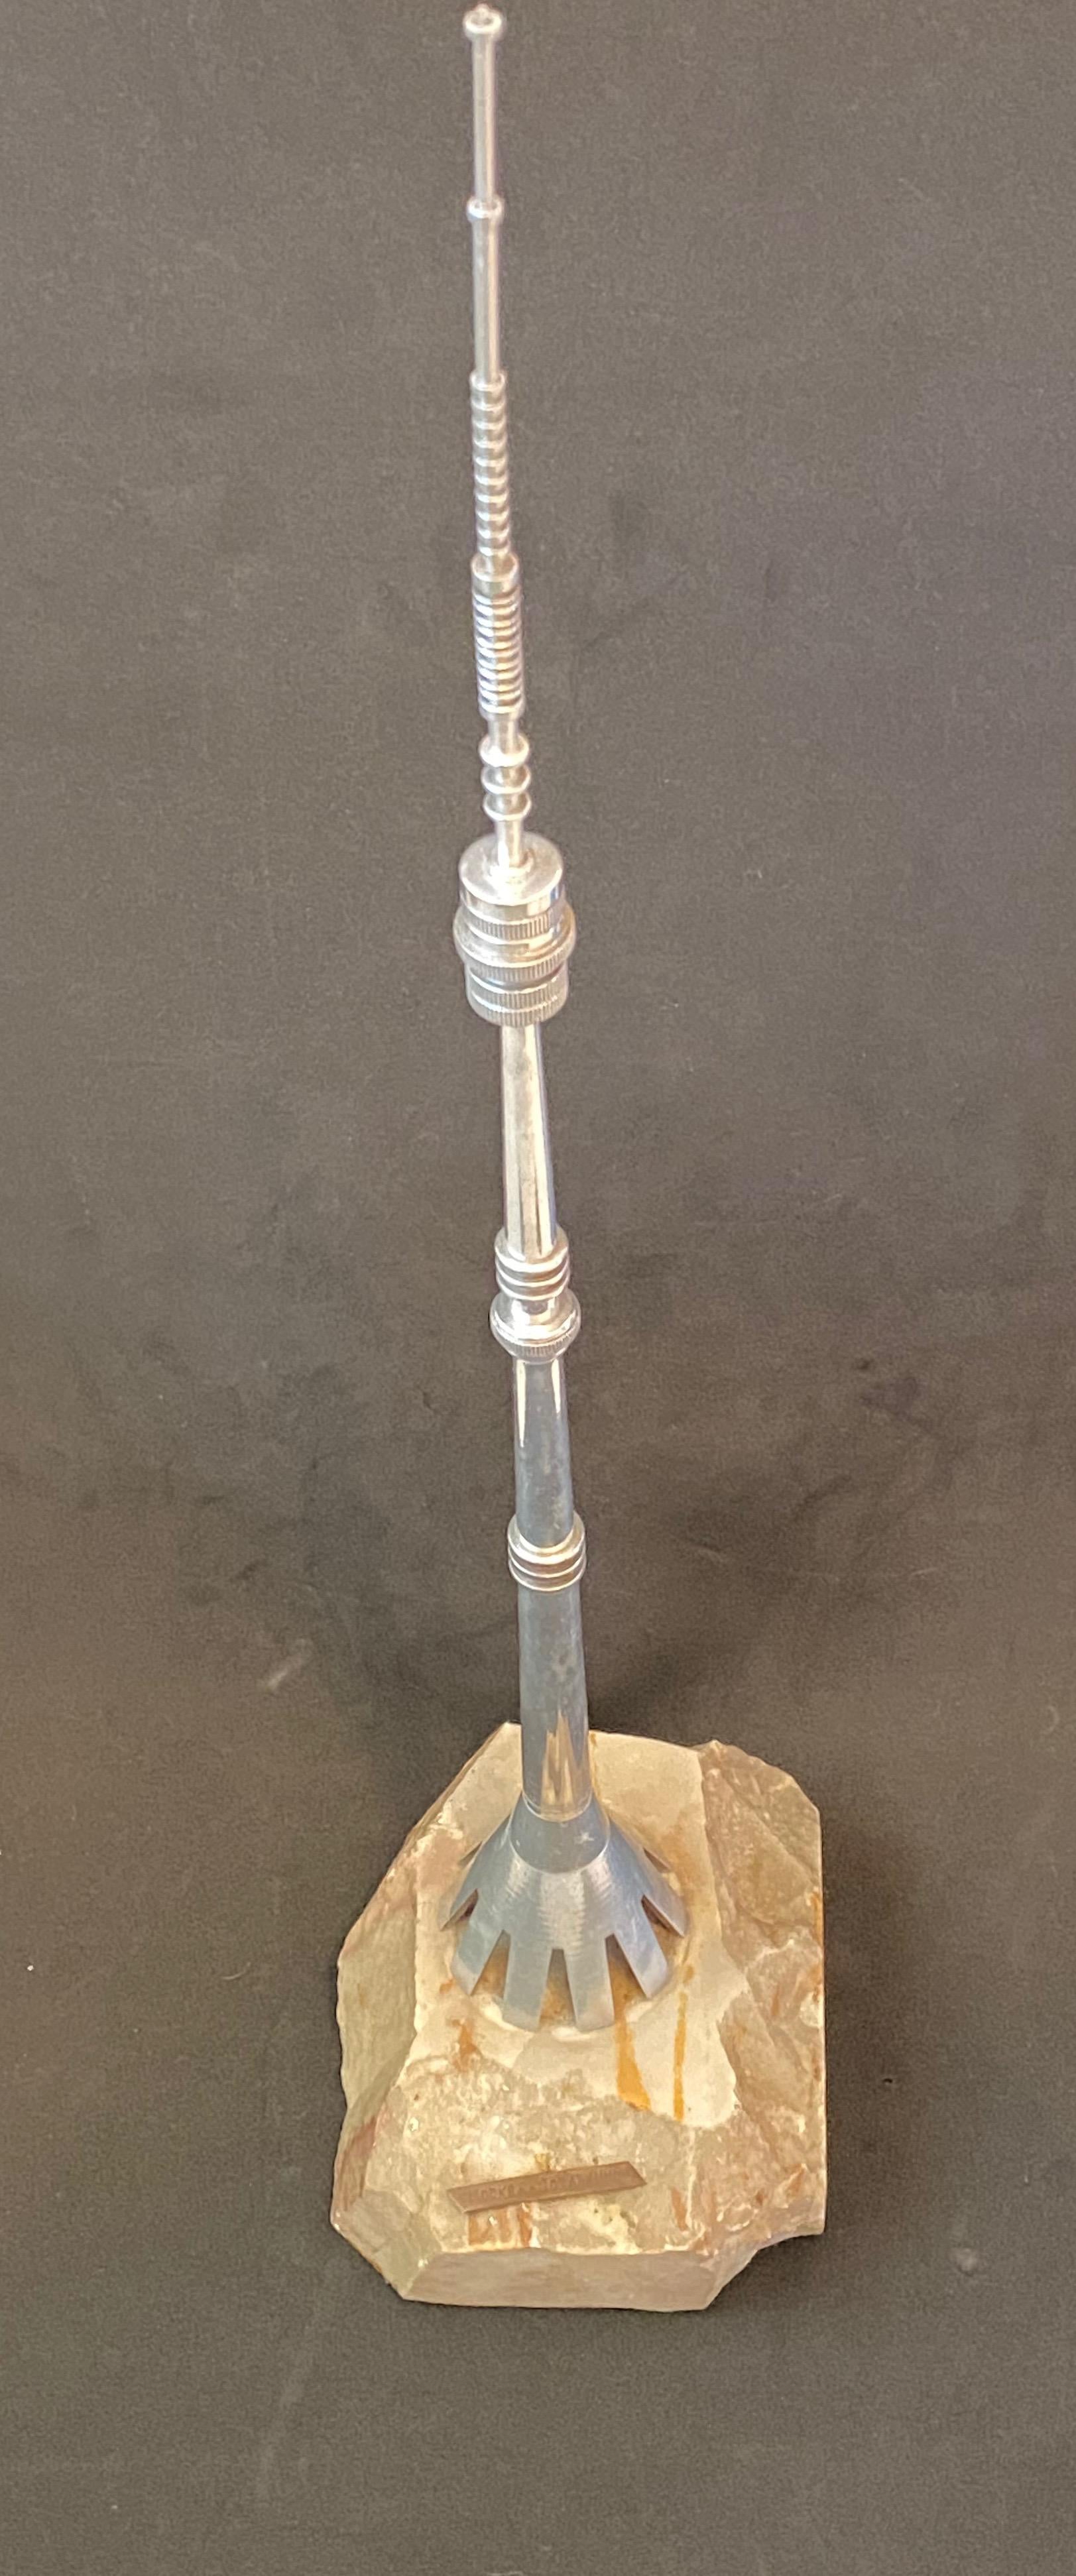 Scaled model of the Moscow Ostankino Tower, television tower. Hand-spun in aluminium, fixed at a stone base. A nice architectural Sculpture for every living room or man cave.